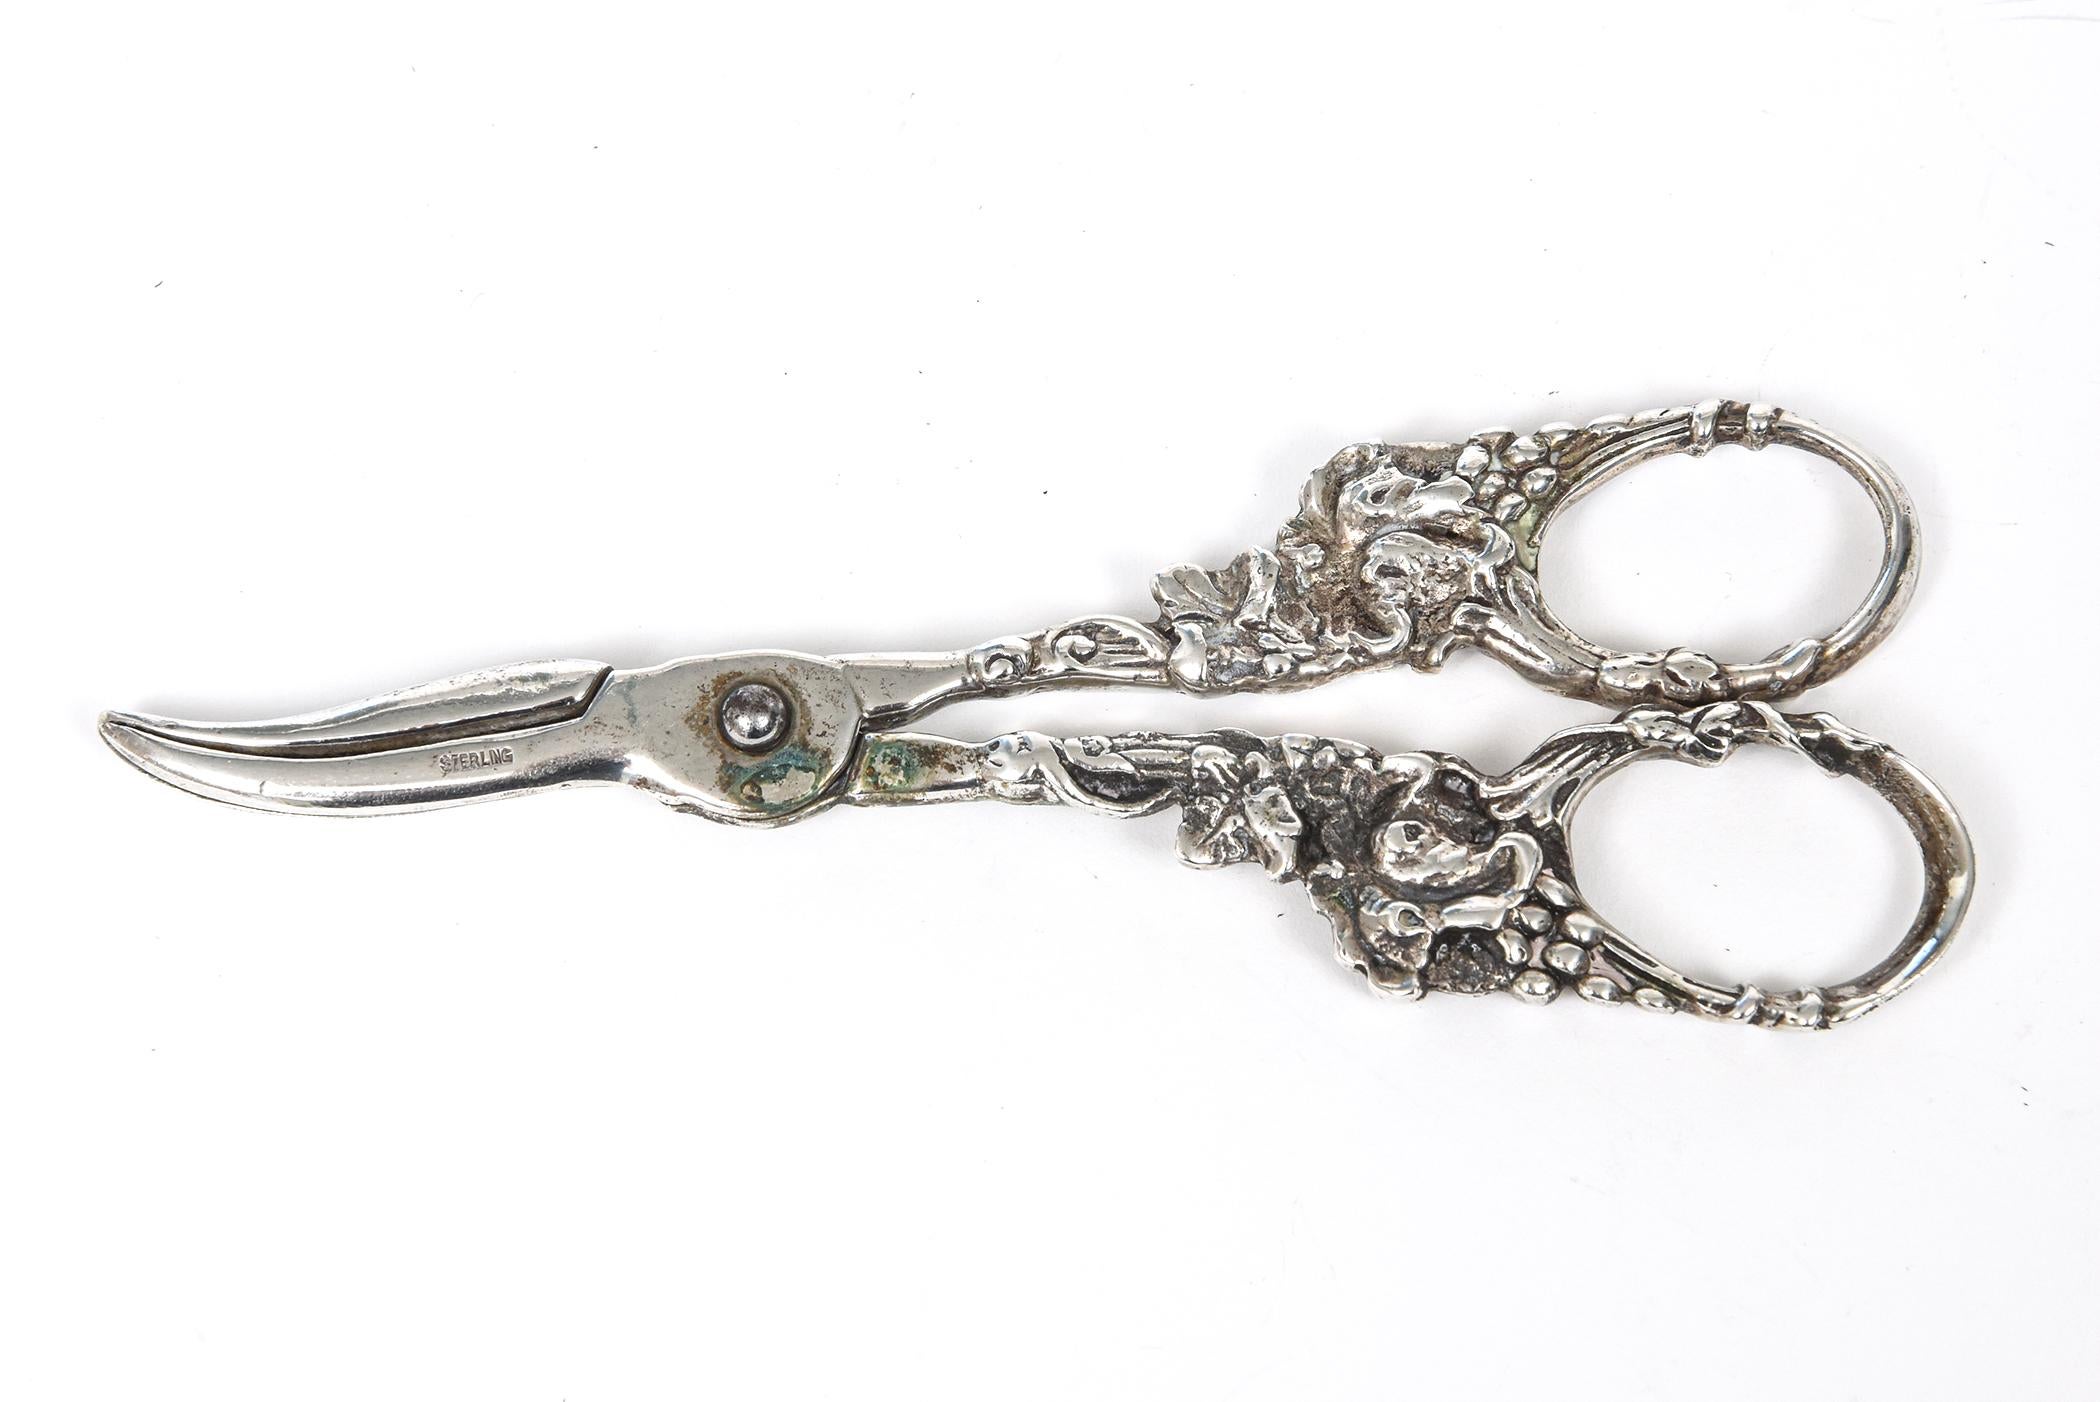 Antique solid sterling silver grape shears featuring a grape and vine floral design. Marked sterling on the blade area. These would be a beautiful addition to any table when you are cutting grapes.